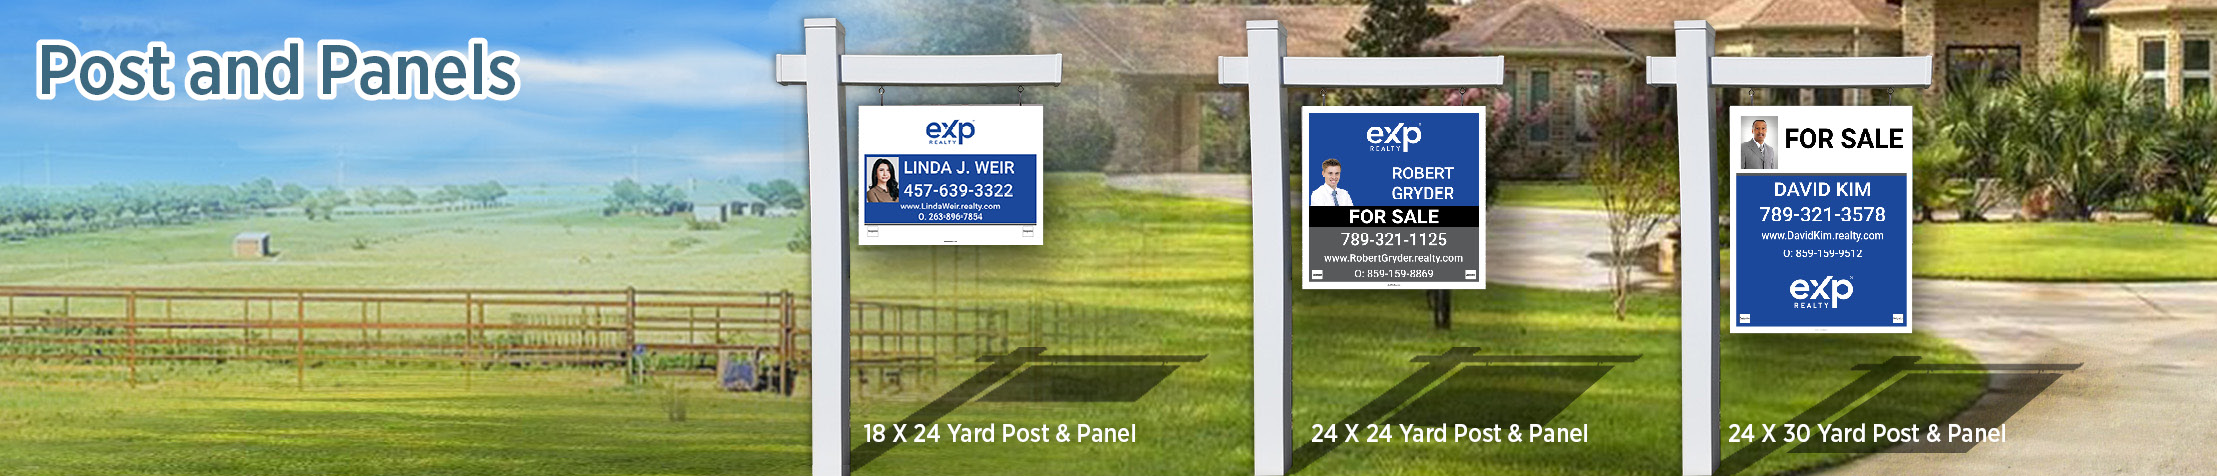 eXp Realty Real Estate Post and Panel - eXp Realty  real estate signs | BestPrintBuy.com